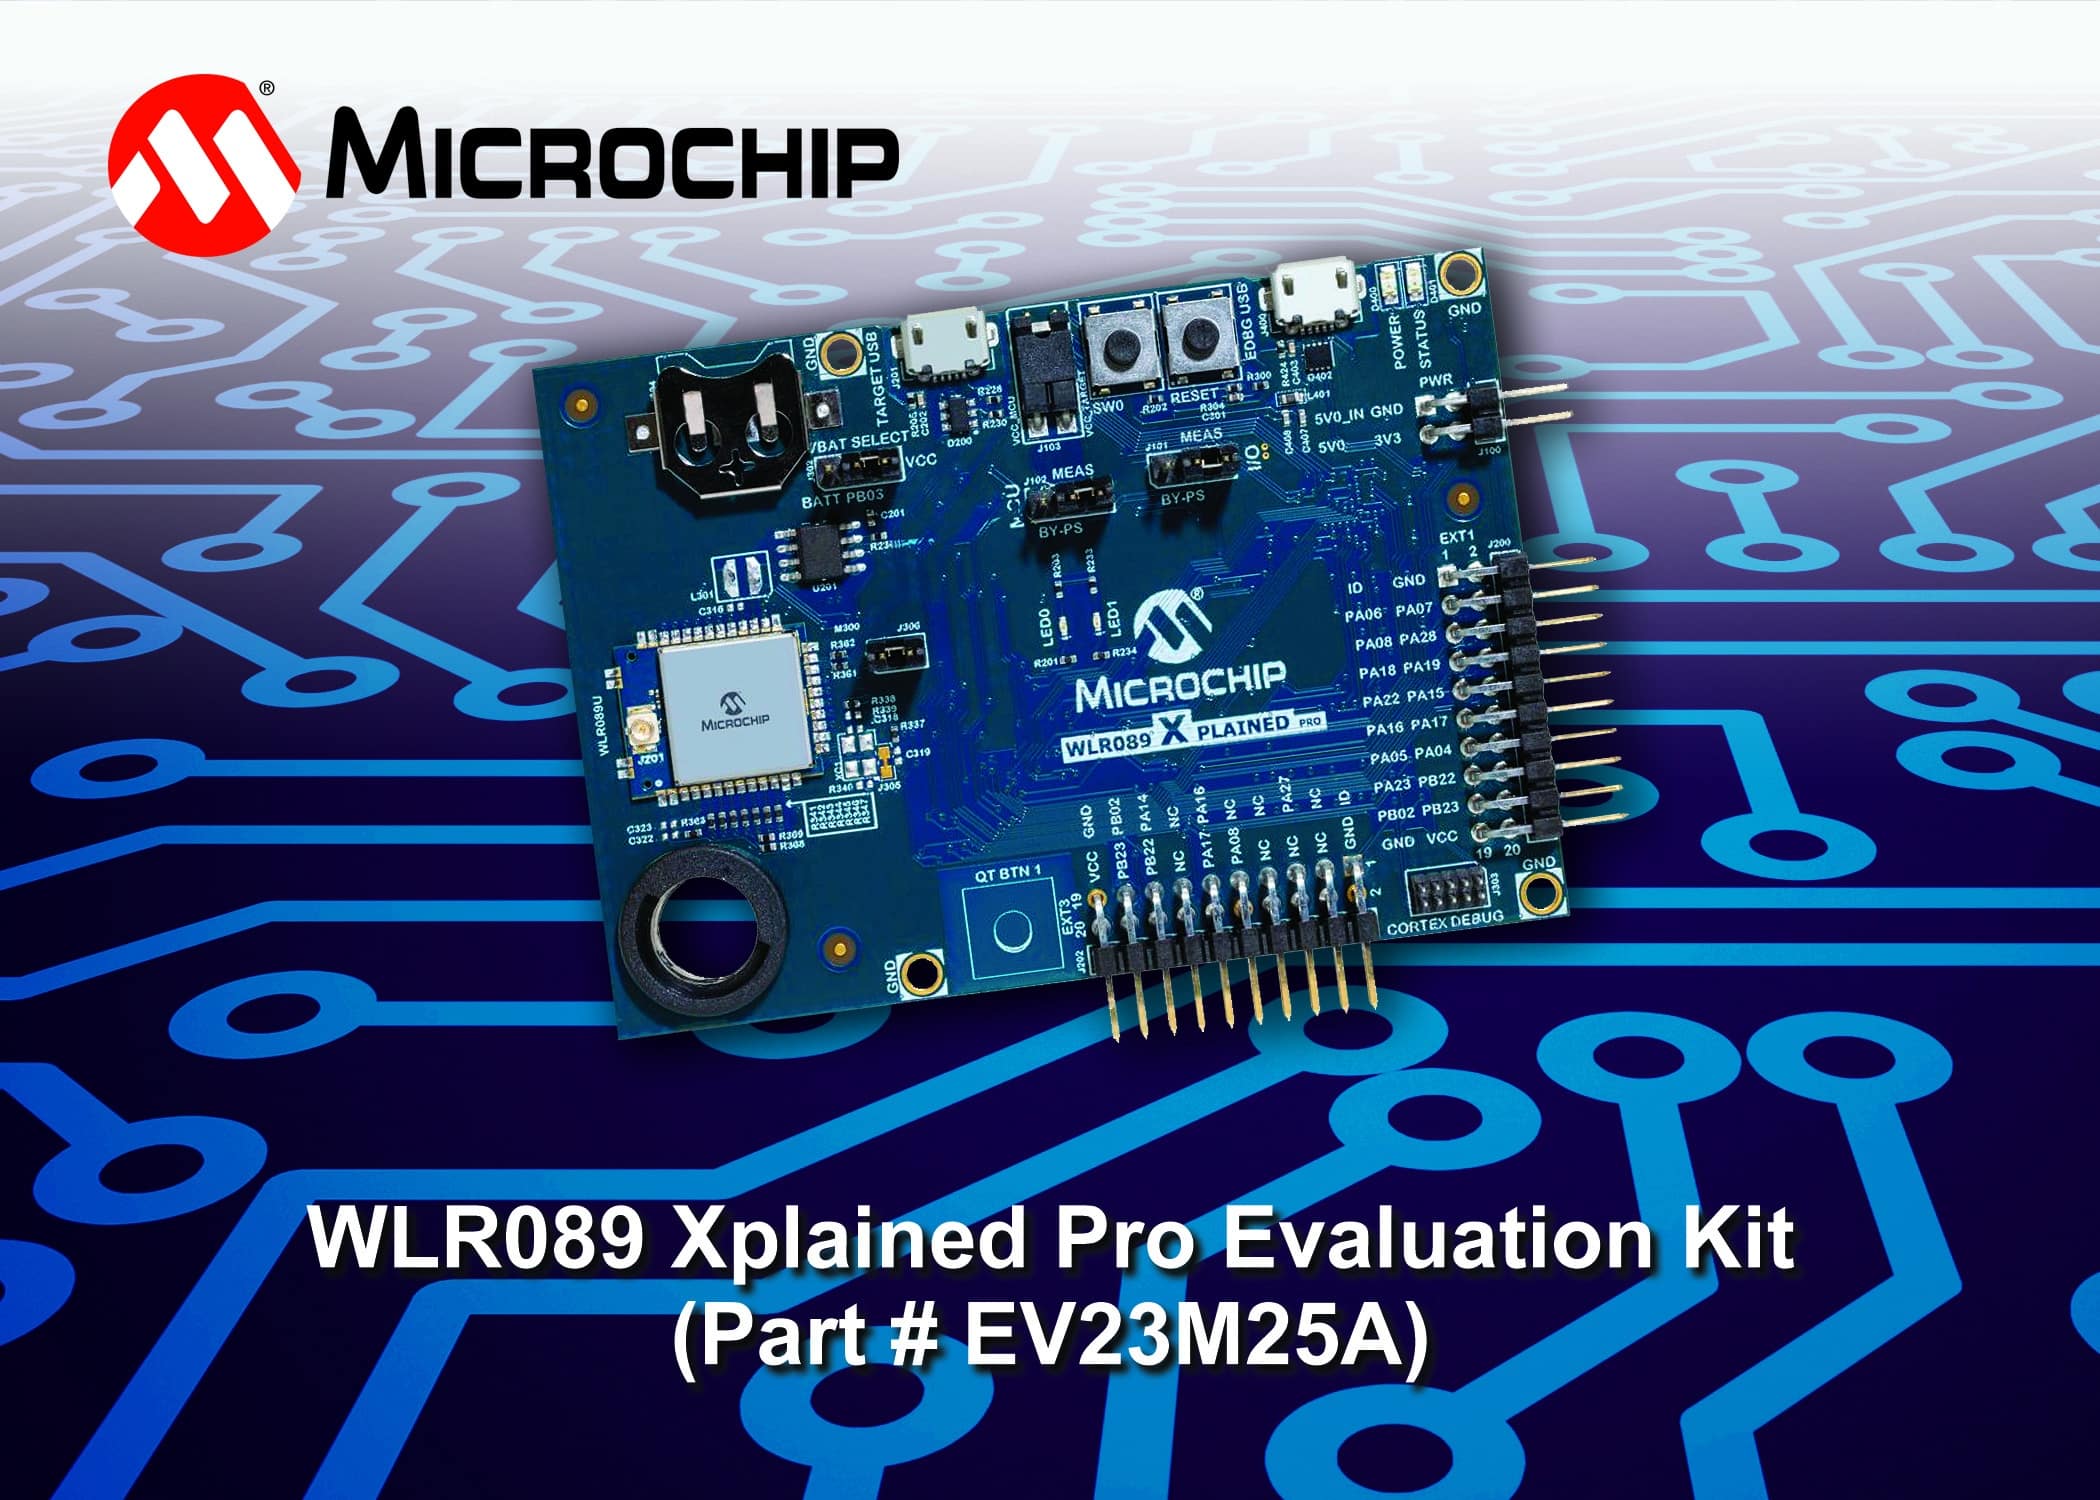 microchip competition